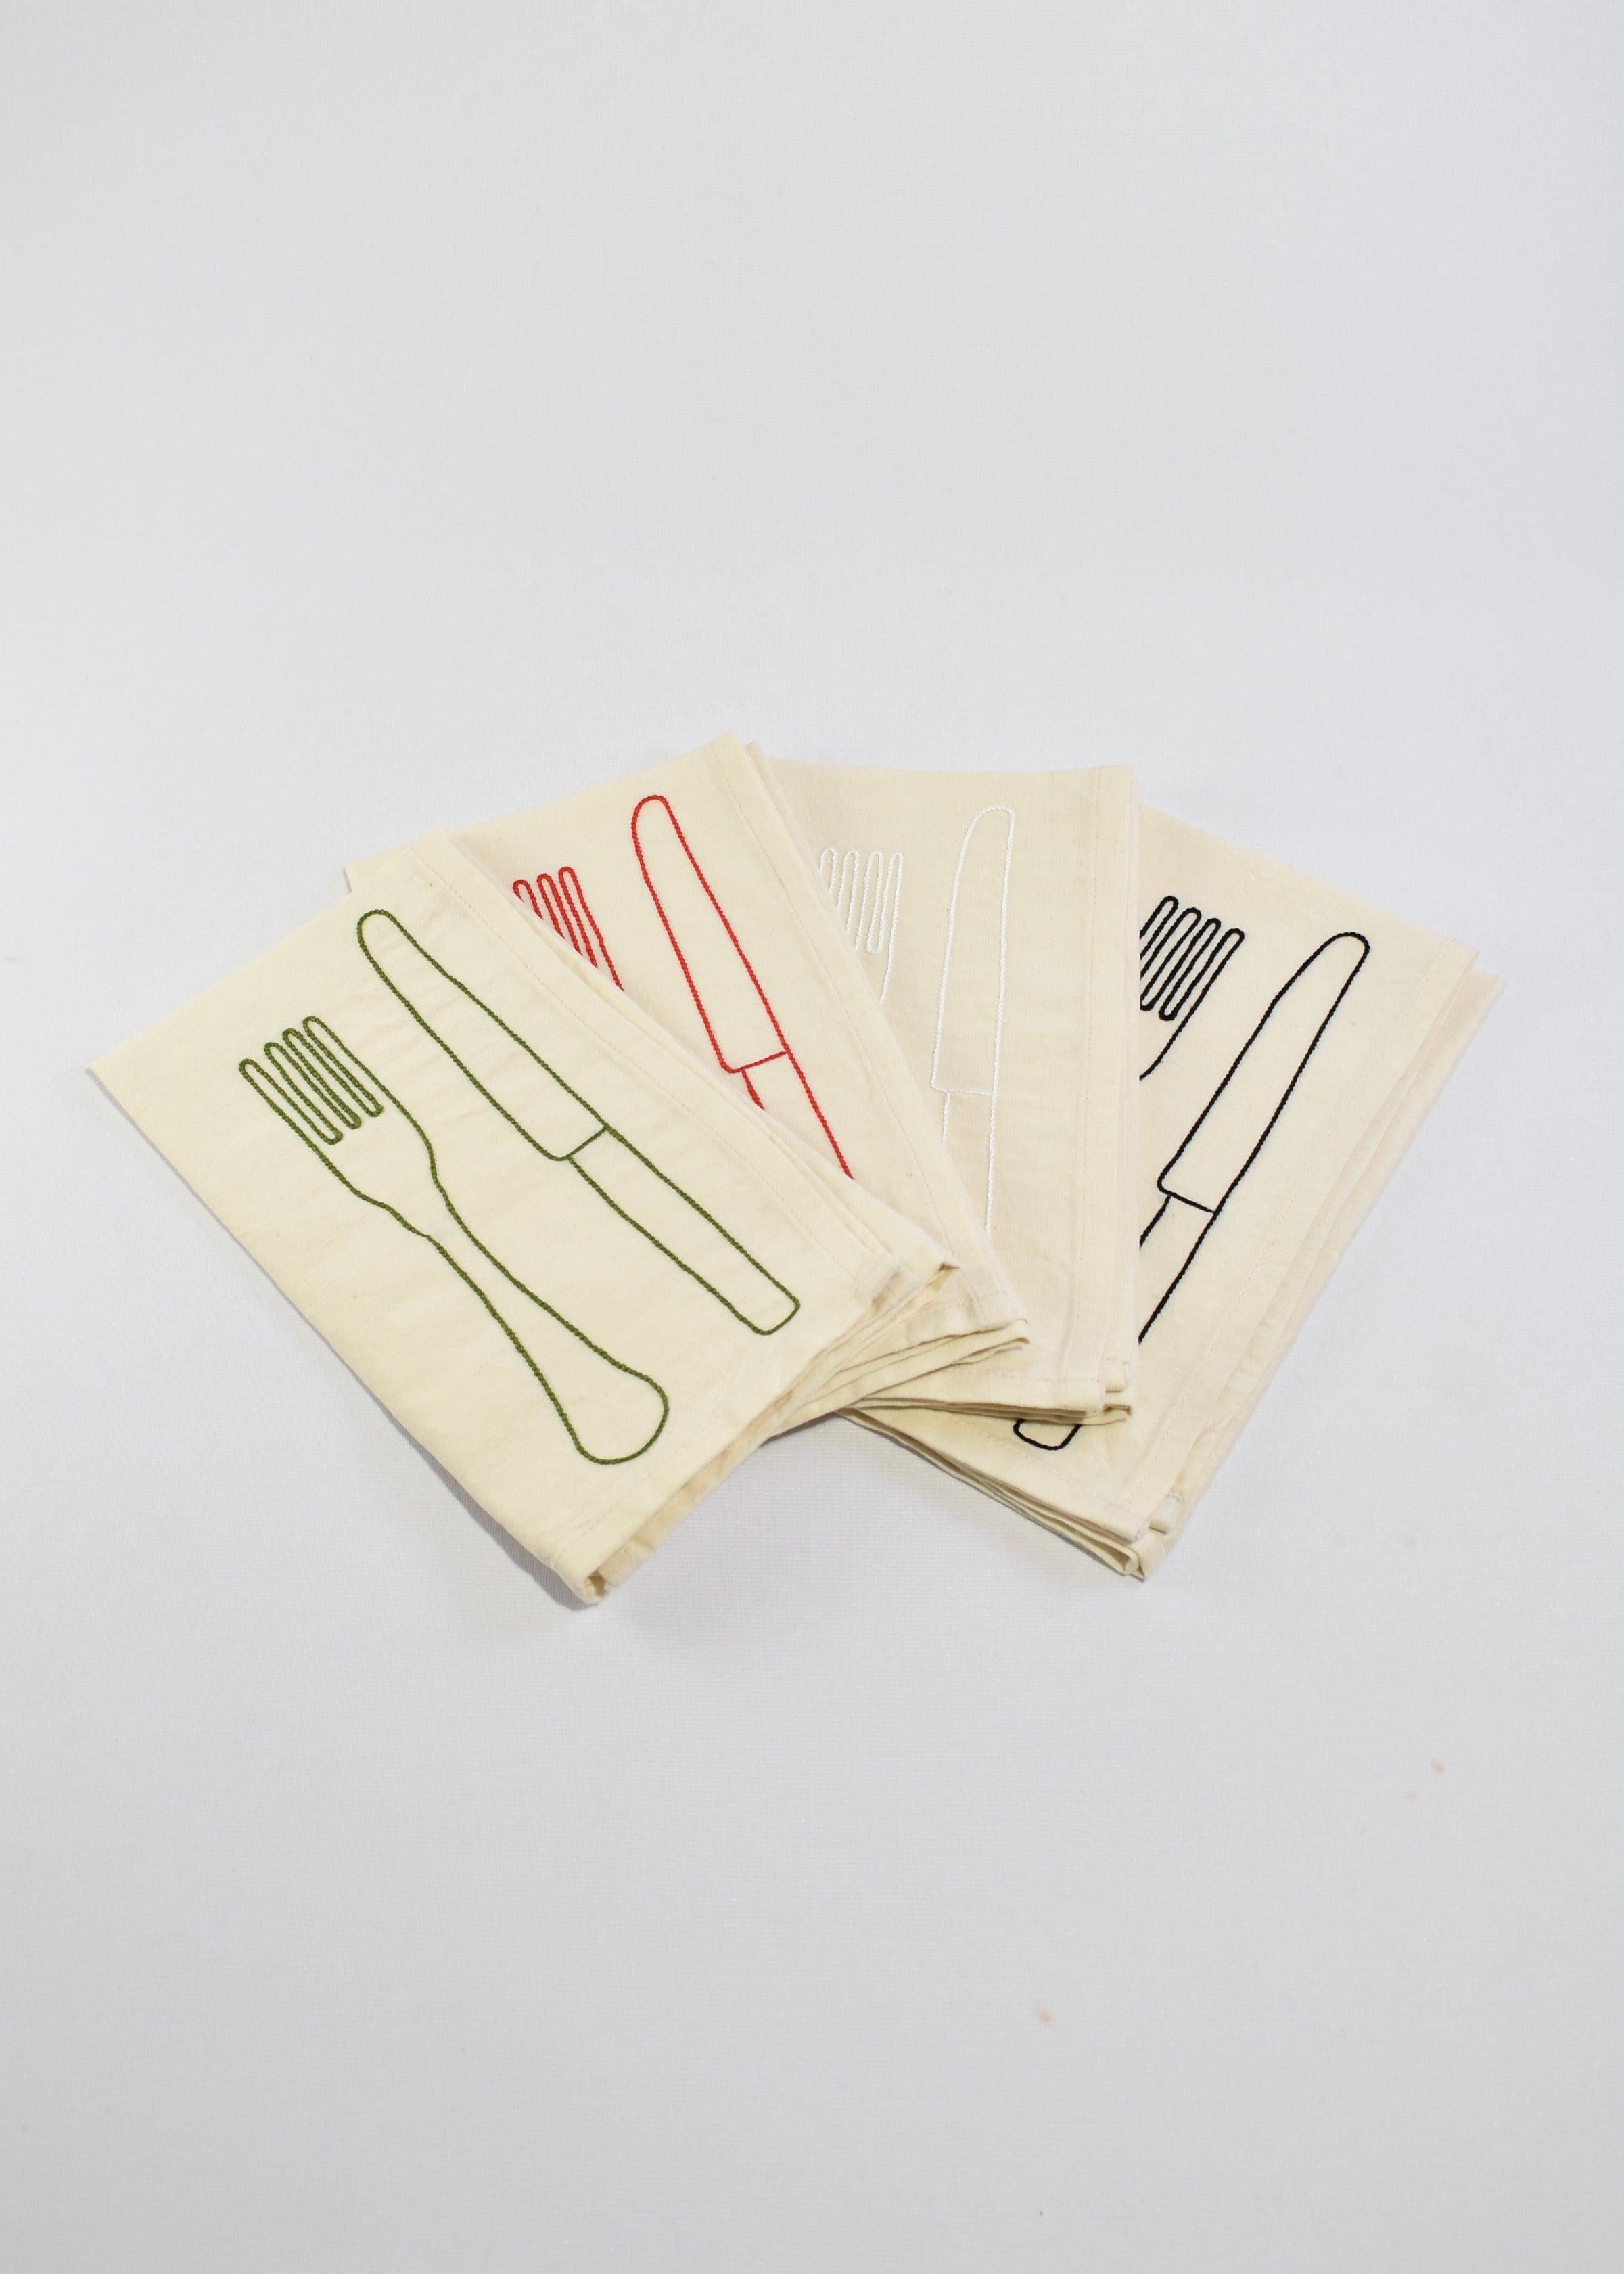 Beautiful antique French linen and cotton napkins embroidered with colored cotton thread featuring a fork and knife in a set of four.

Each set contains four different colors of embroidery - green, red, white, and black. Designed by Sarah Espeute